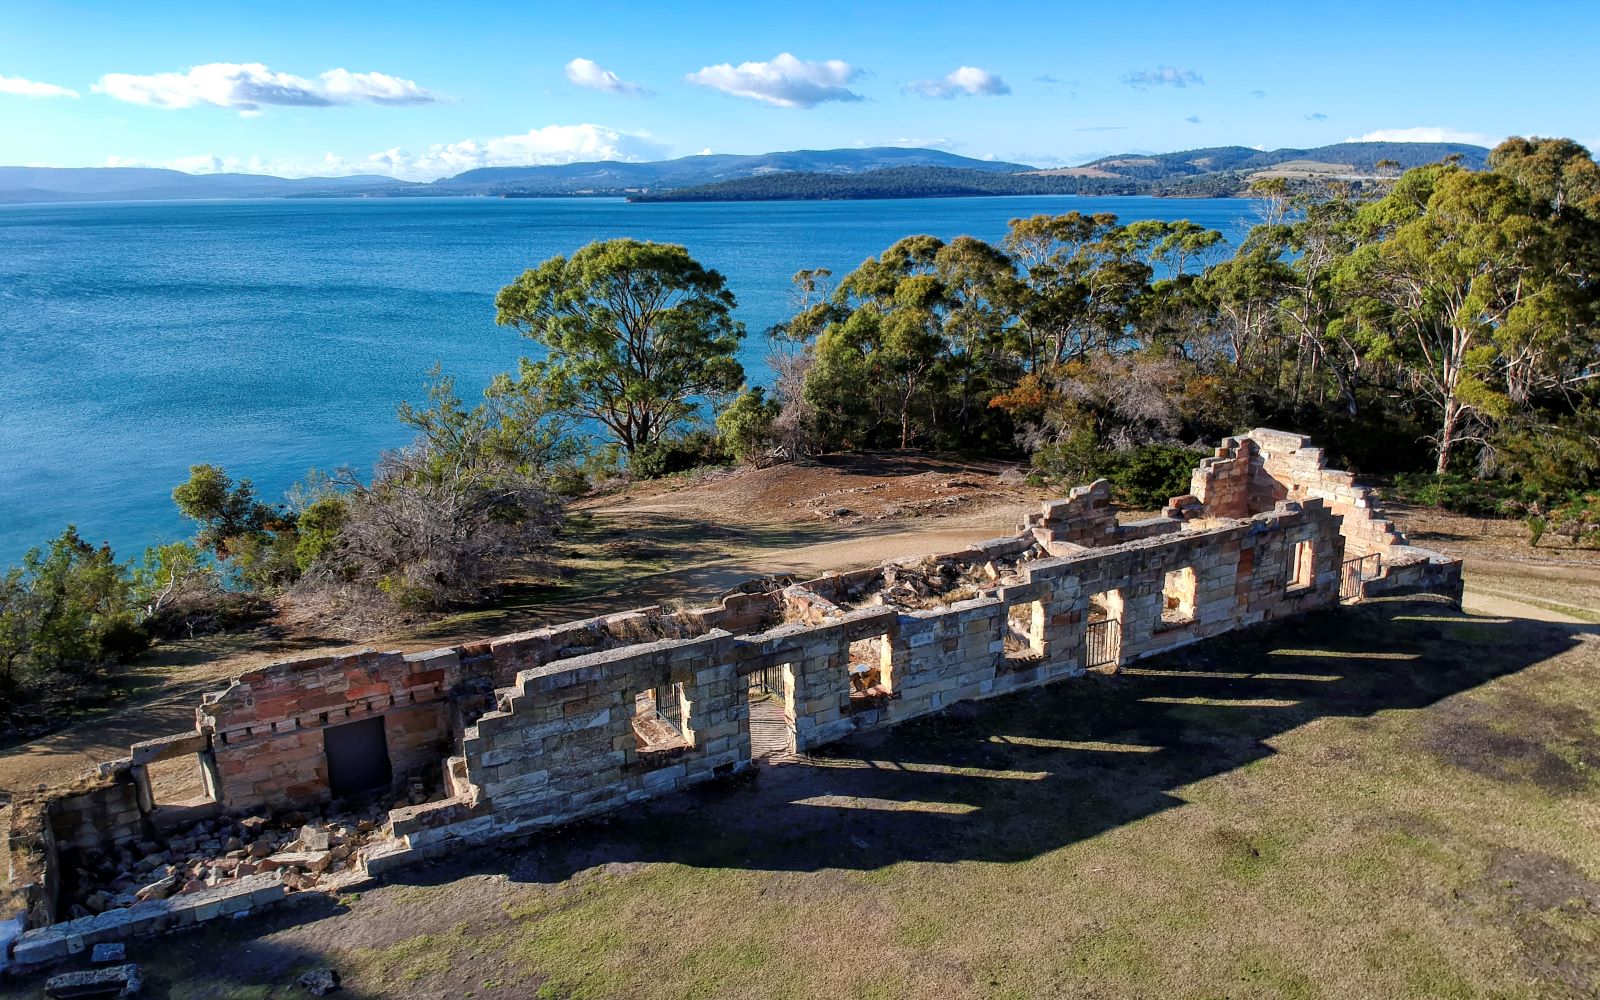 An old coal mine site located on the Tasman Peninsula showing the remains of sandstone buildings against a beautiful seaside backdrop